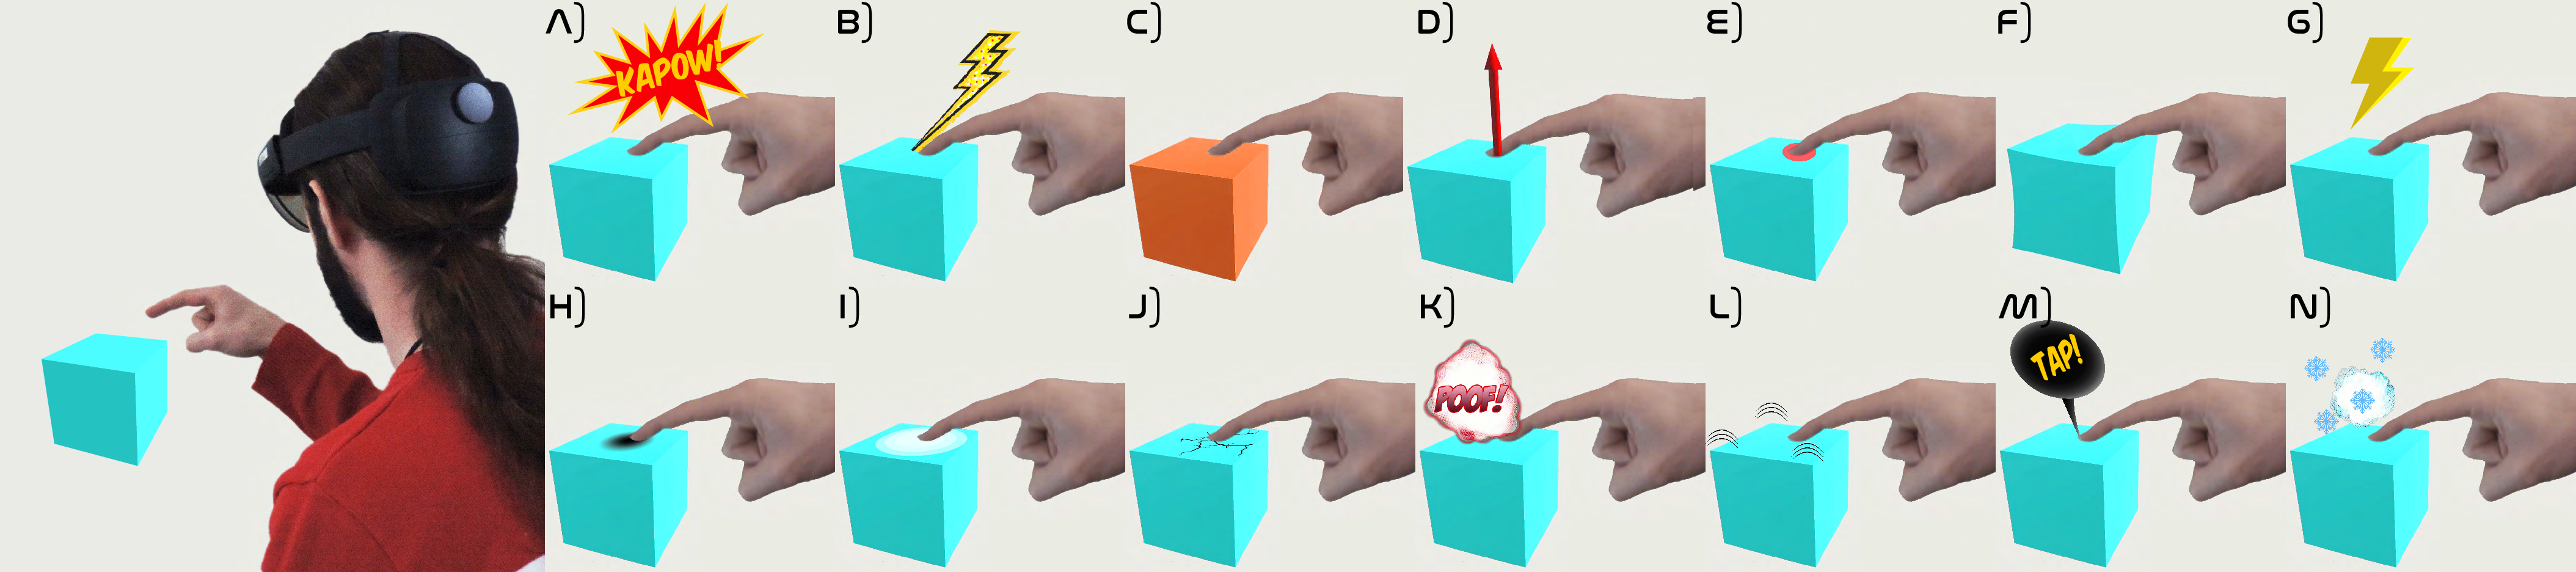 Our set of visual feedback techniques meant to represent contact in eXtended Reality. These techniques were conceived using the design space presented in this paper and implemented in a Microsoft HoloLens 2 (left). The techniques are the following: A) Kapow, B) Lightning, C) Color Change, D) Arrow, E) Disk, F) Deformation, G) Spark3D, H) Hole, I) Ripple, J) Crack, K) Poof, L) Shaking, M) Bubble3D, and N) Snowflakes.